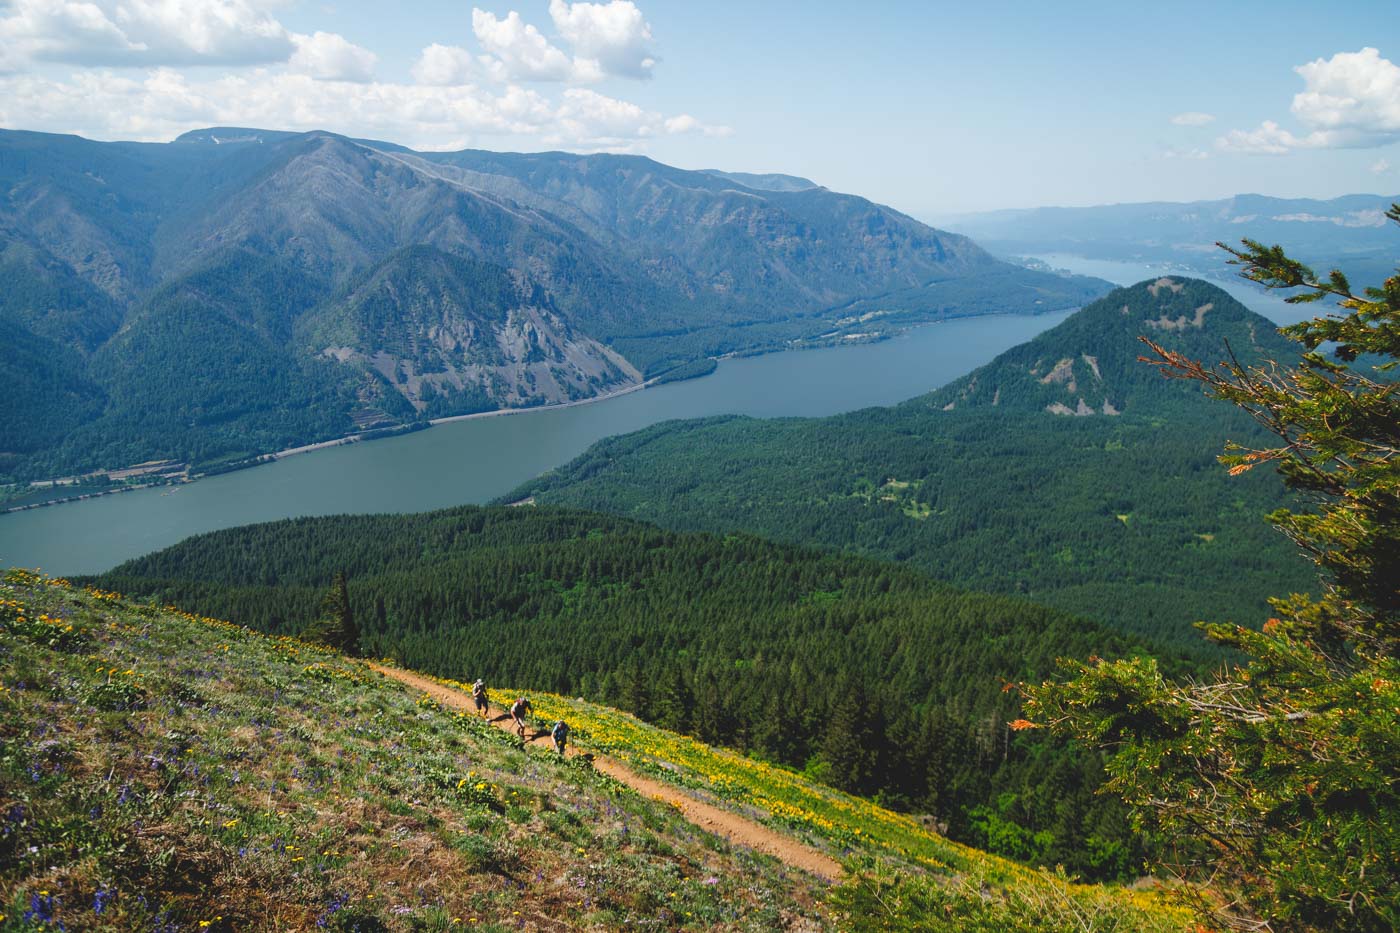 Three hikers along Dog Mountain Trail with a view across the Washington landscape.